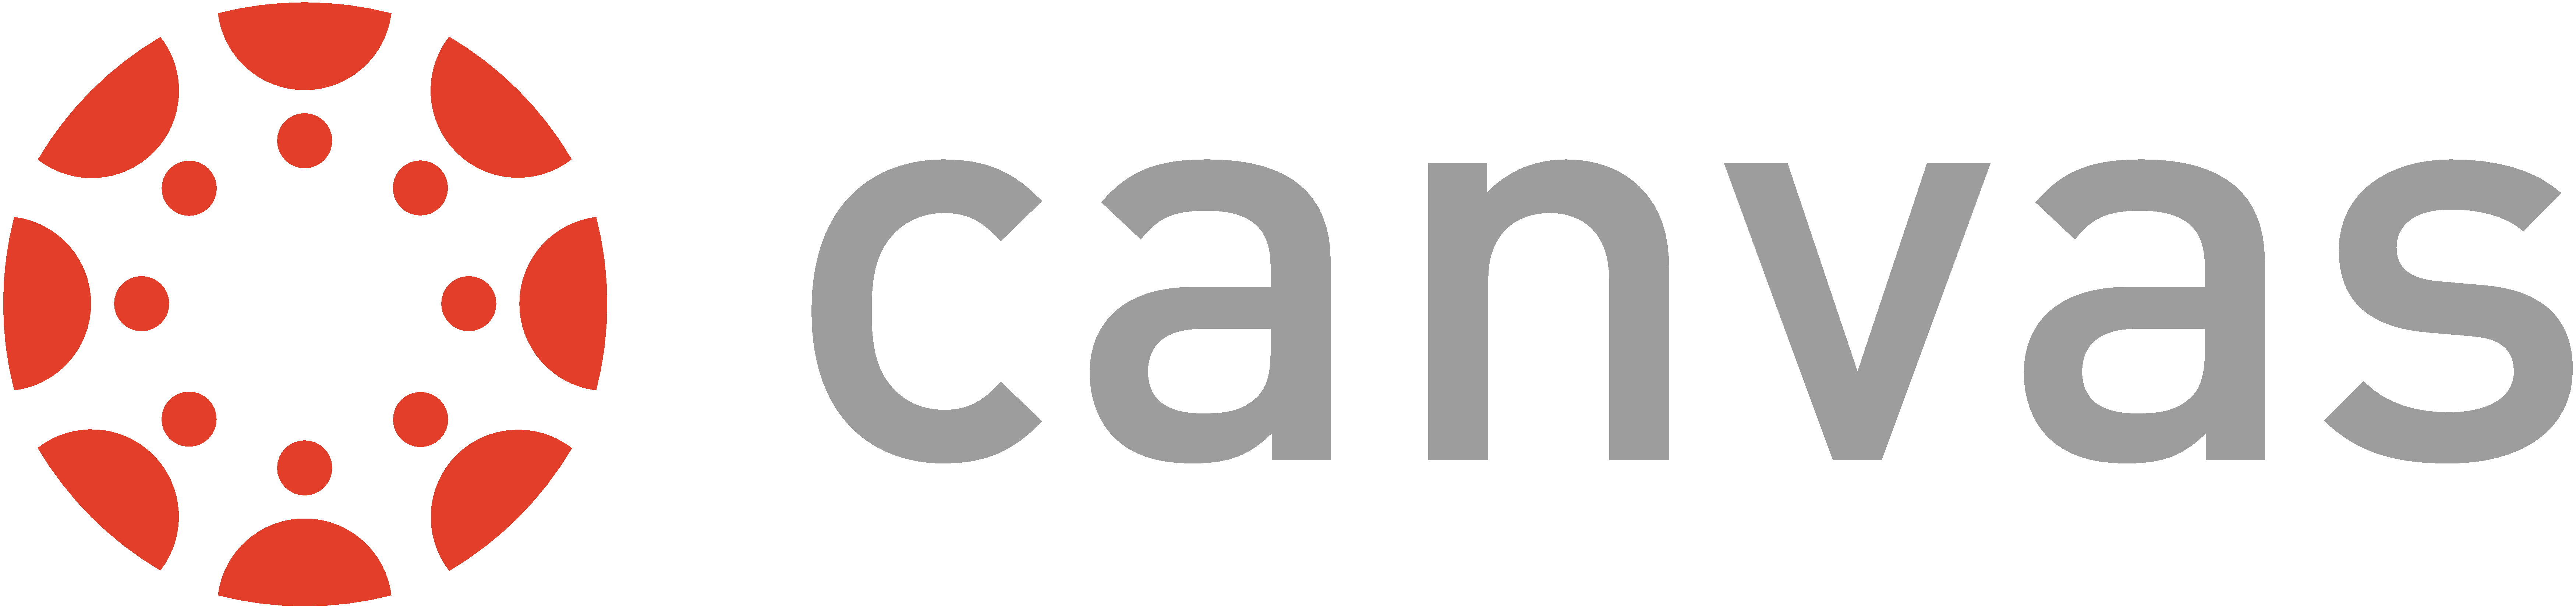 Instructure Canvas Logo